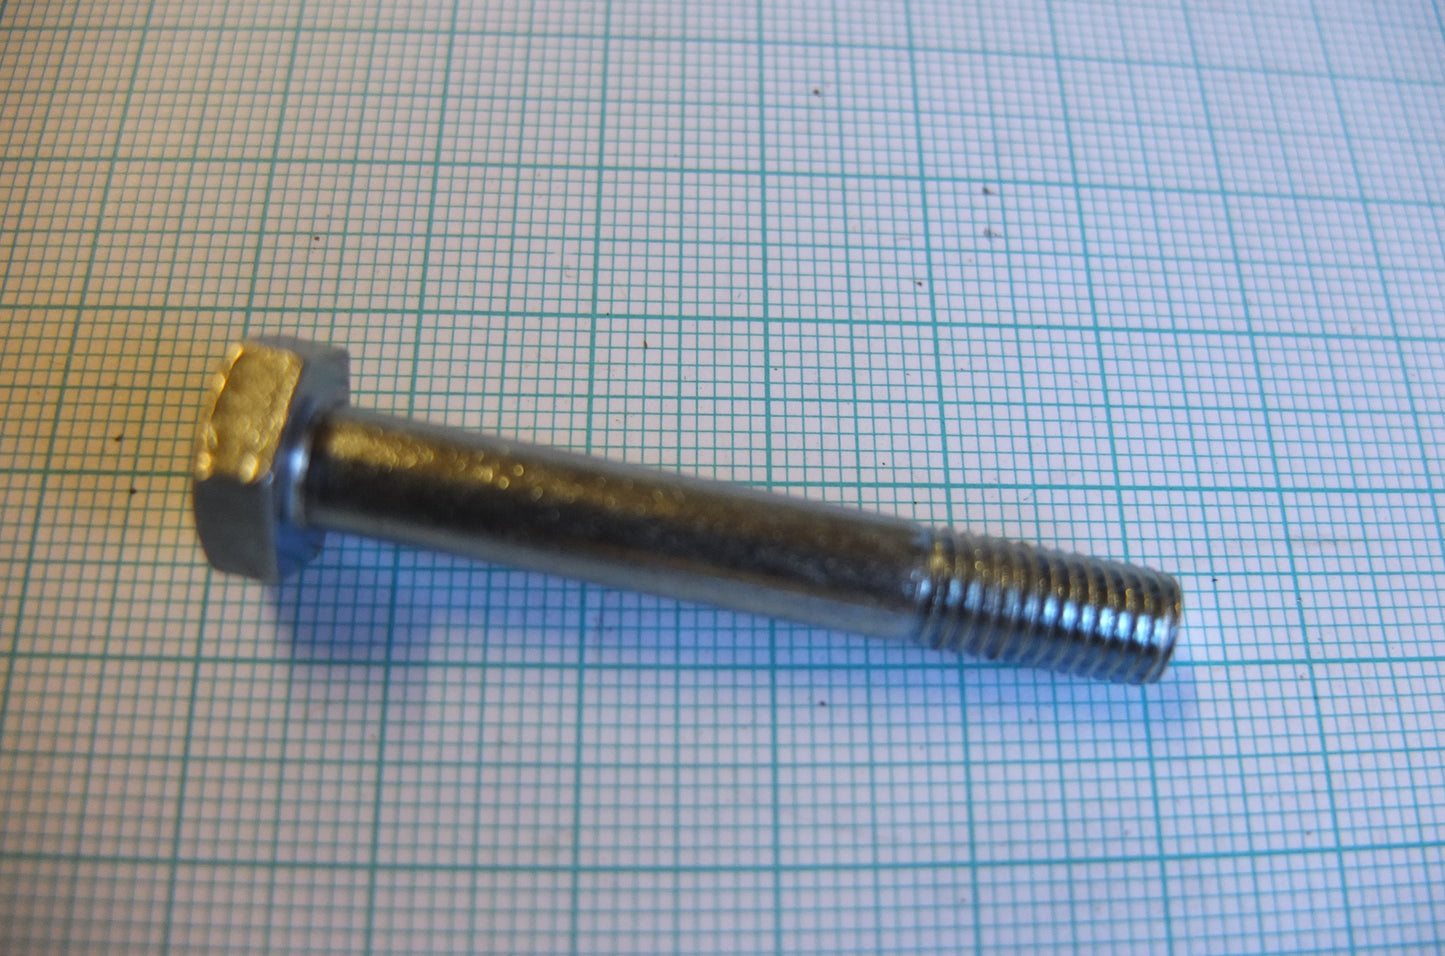 P9/004 S8 tail pipe pinch bolt